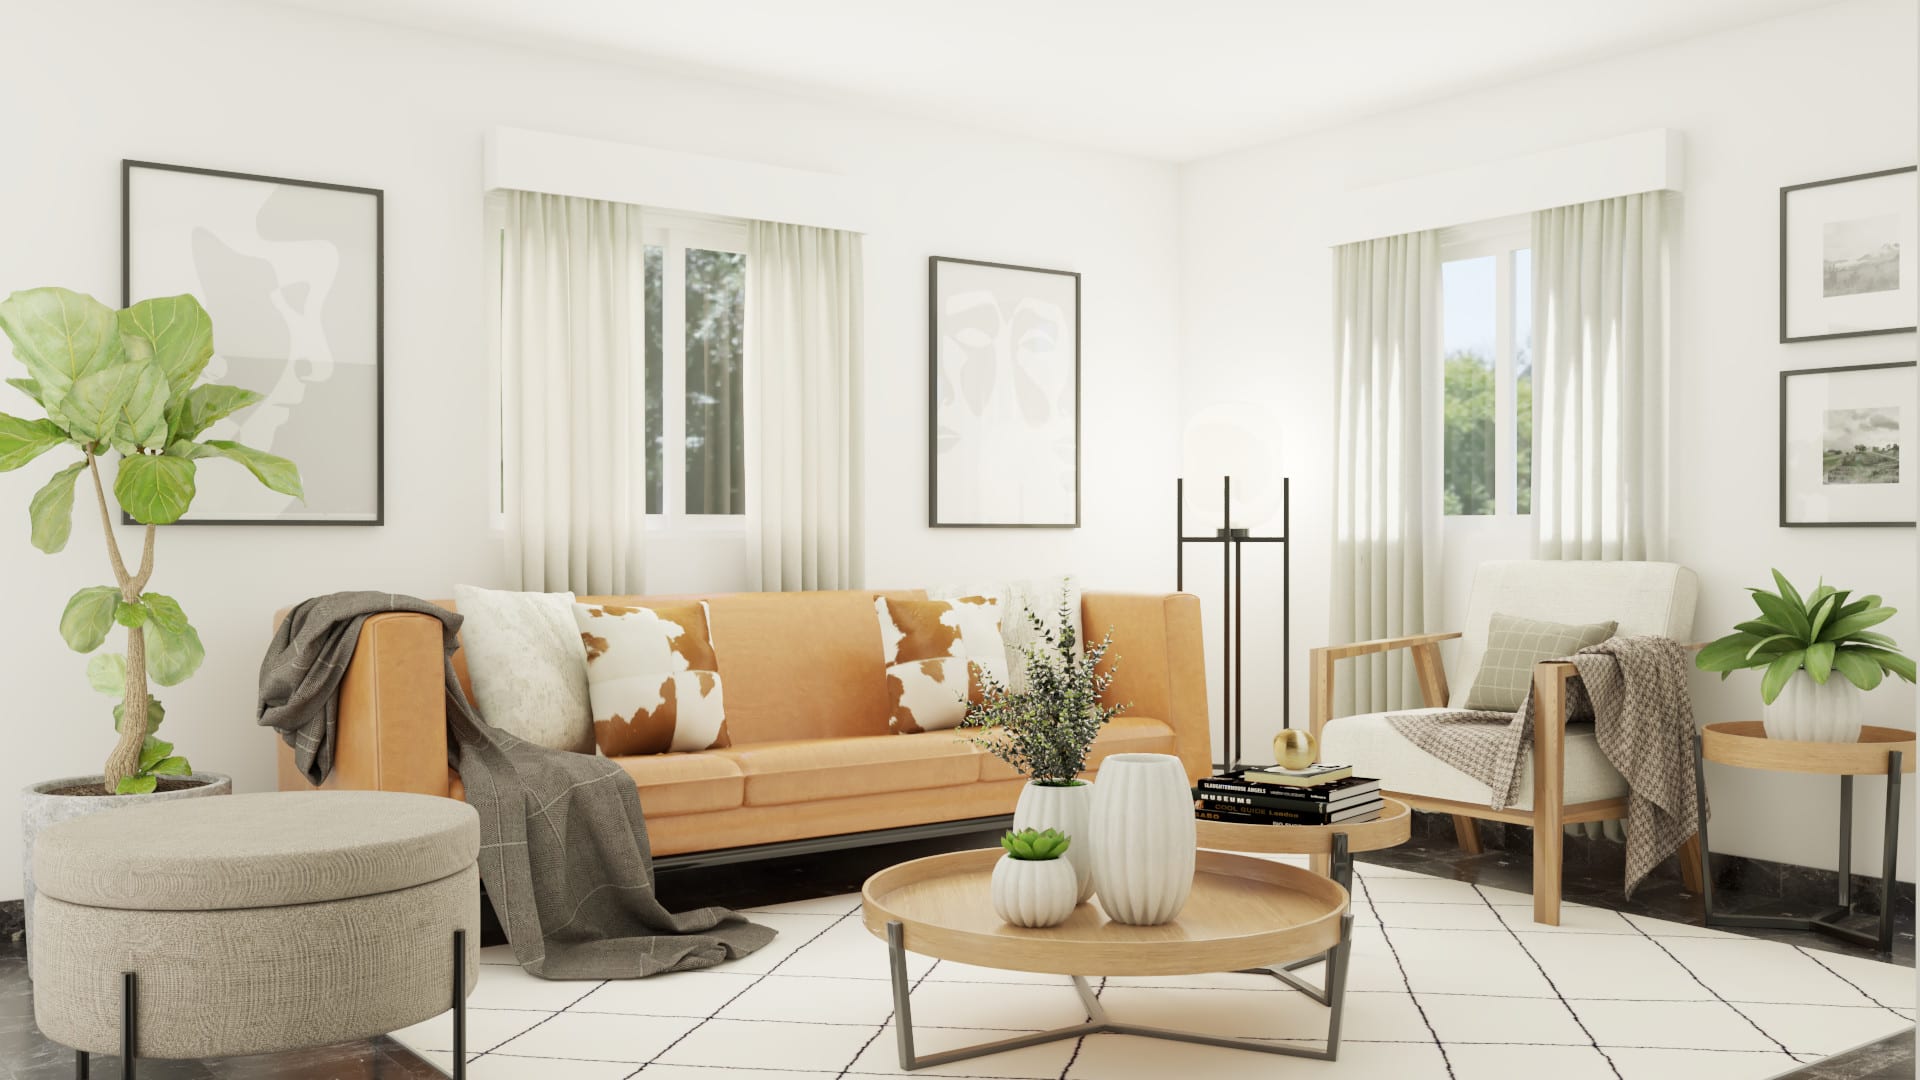 Create an interior design and realistic 3d rendering by Noguerad | Fiverr